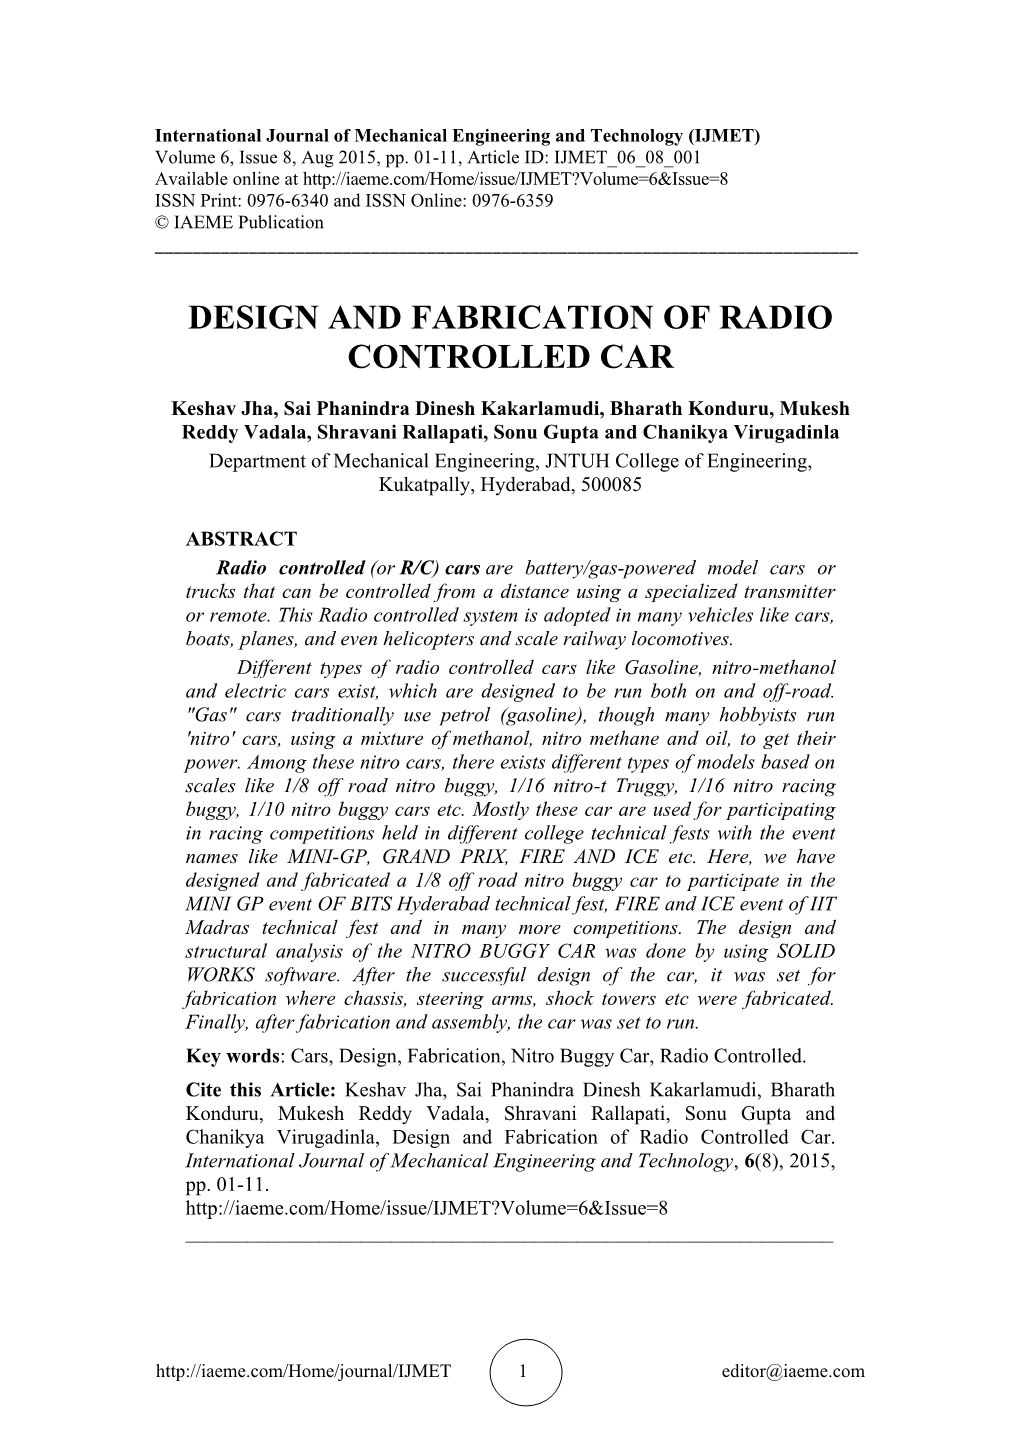 Design and Fabrication of Radio Controlled Car